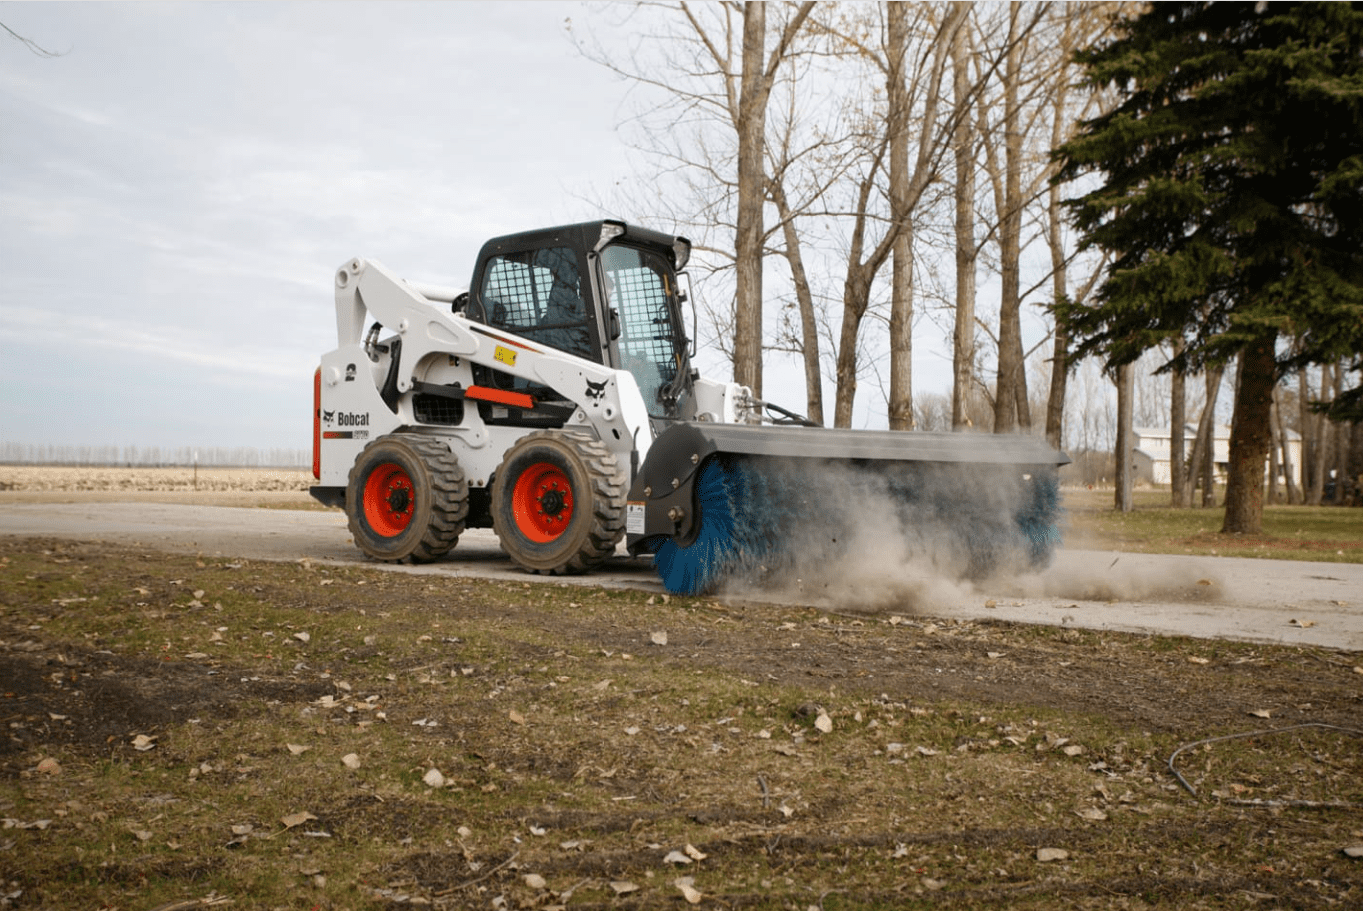 Browse Specs and more for the S770 Skid-Steer Loader - Bobcat of North Texas